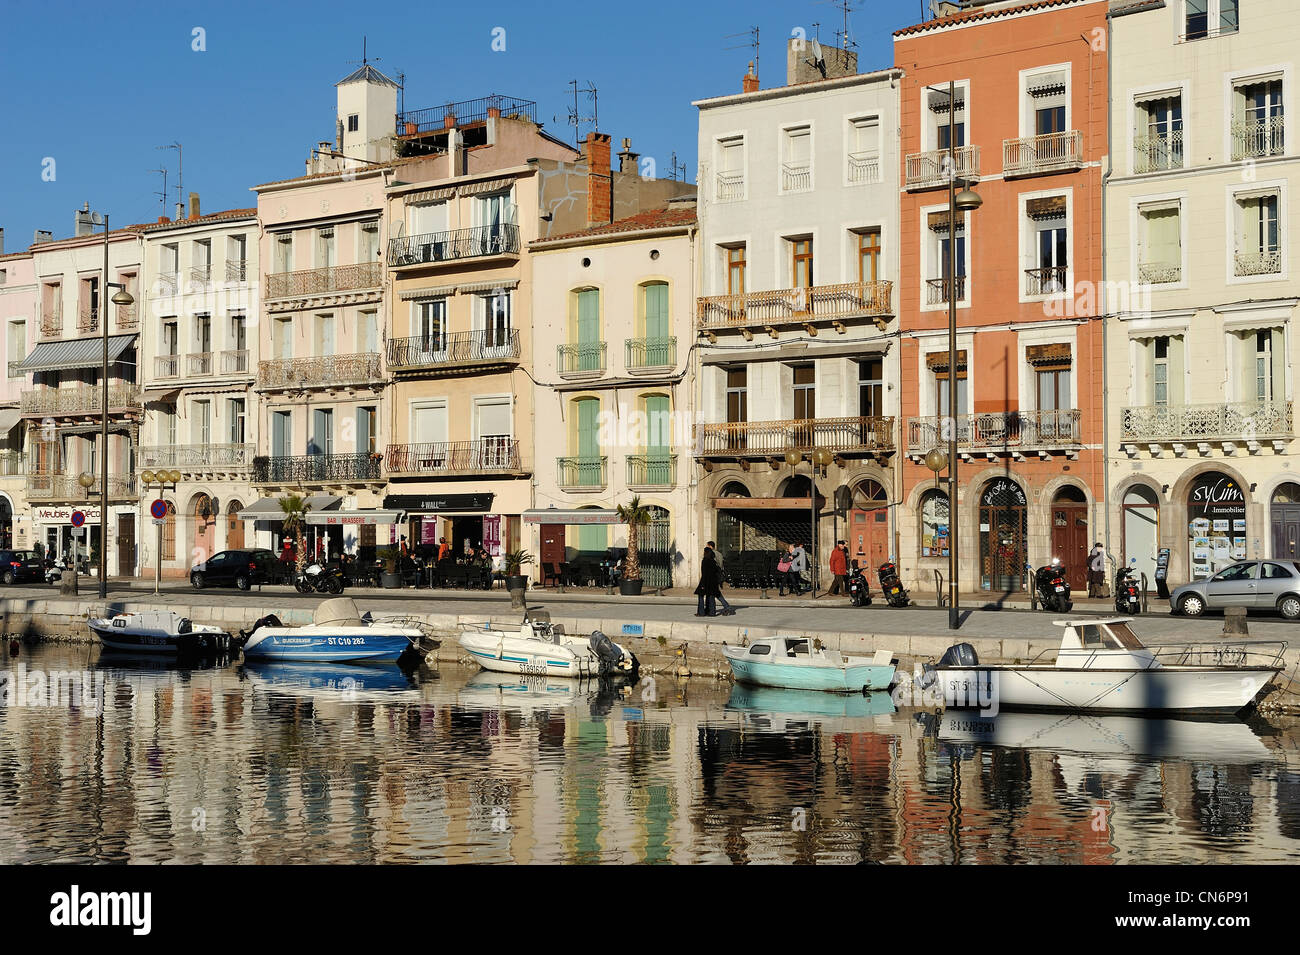 Sete Languedoc France city known for canals Stock Photo